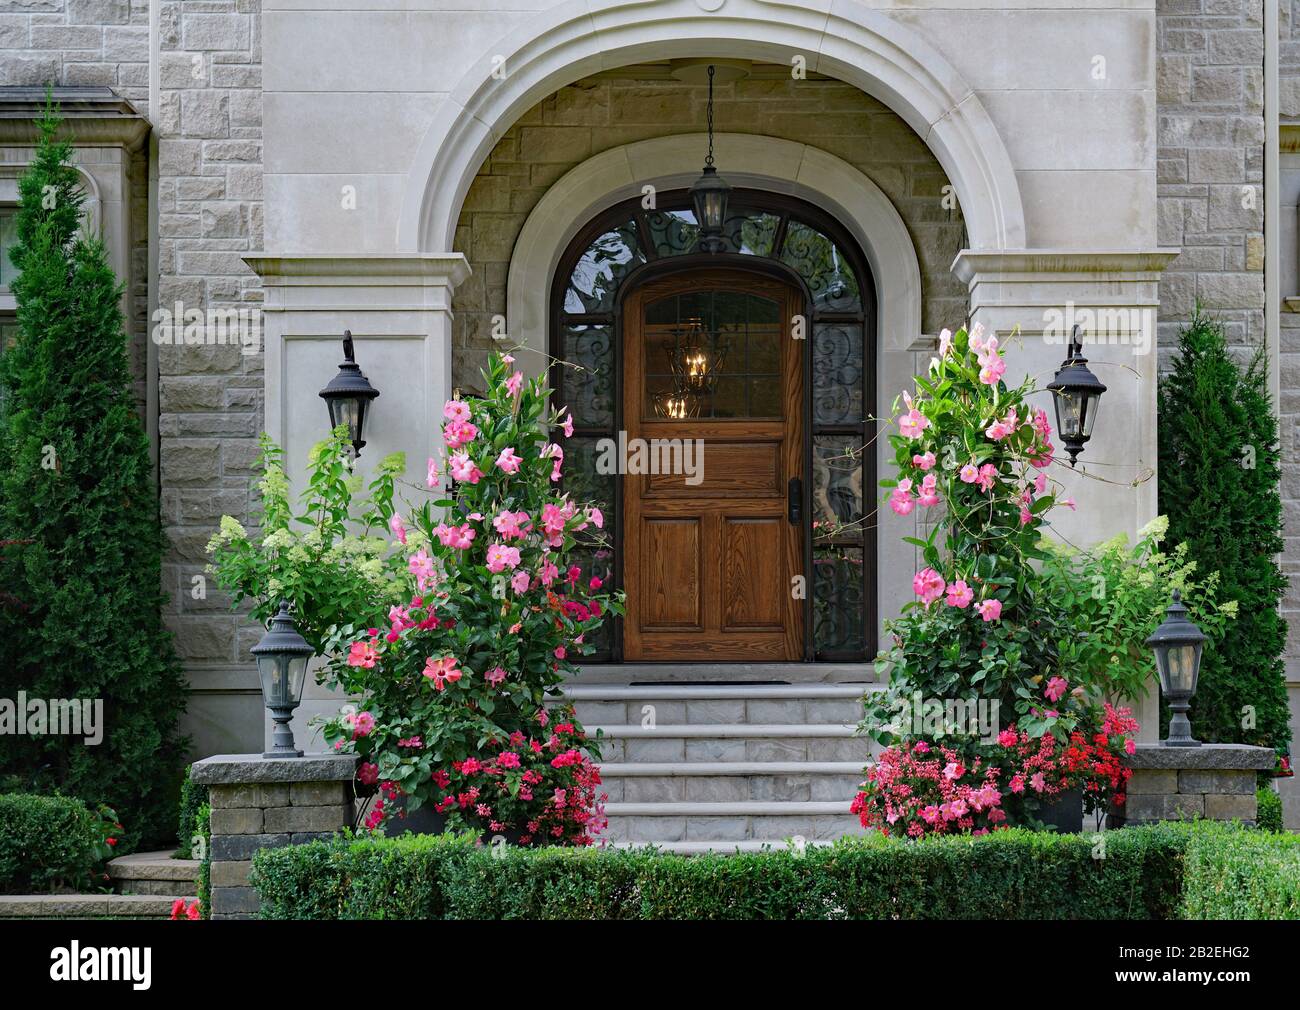 front door of elegant stone fronted house with large standing amaryllis flowers Stock Photo